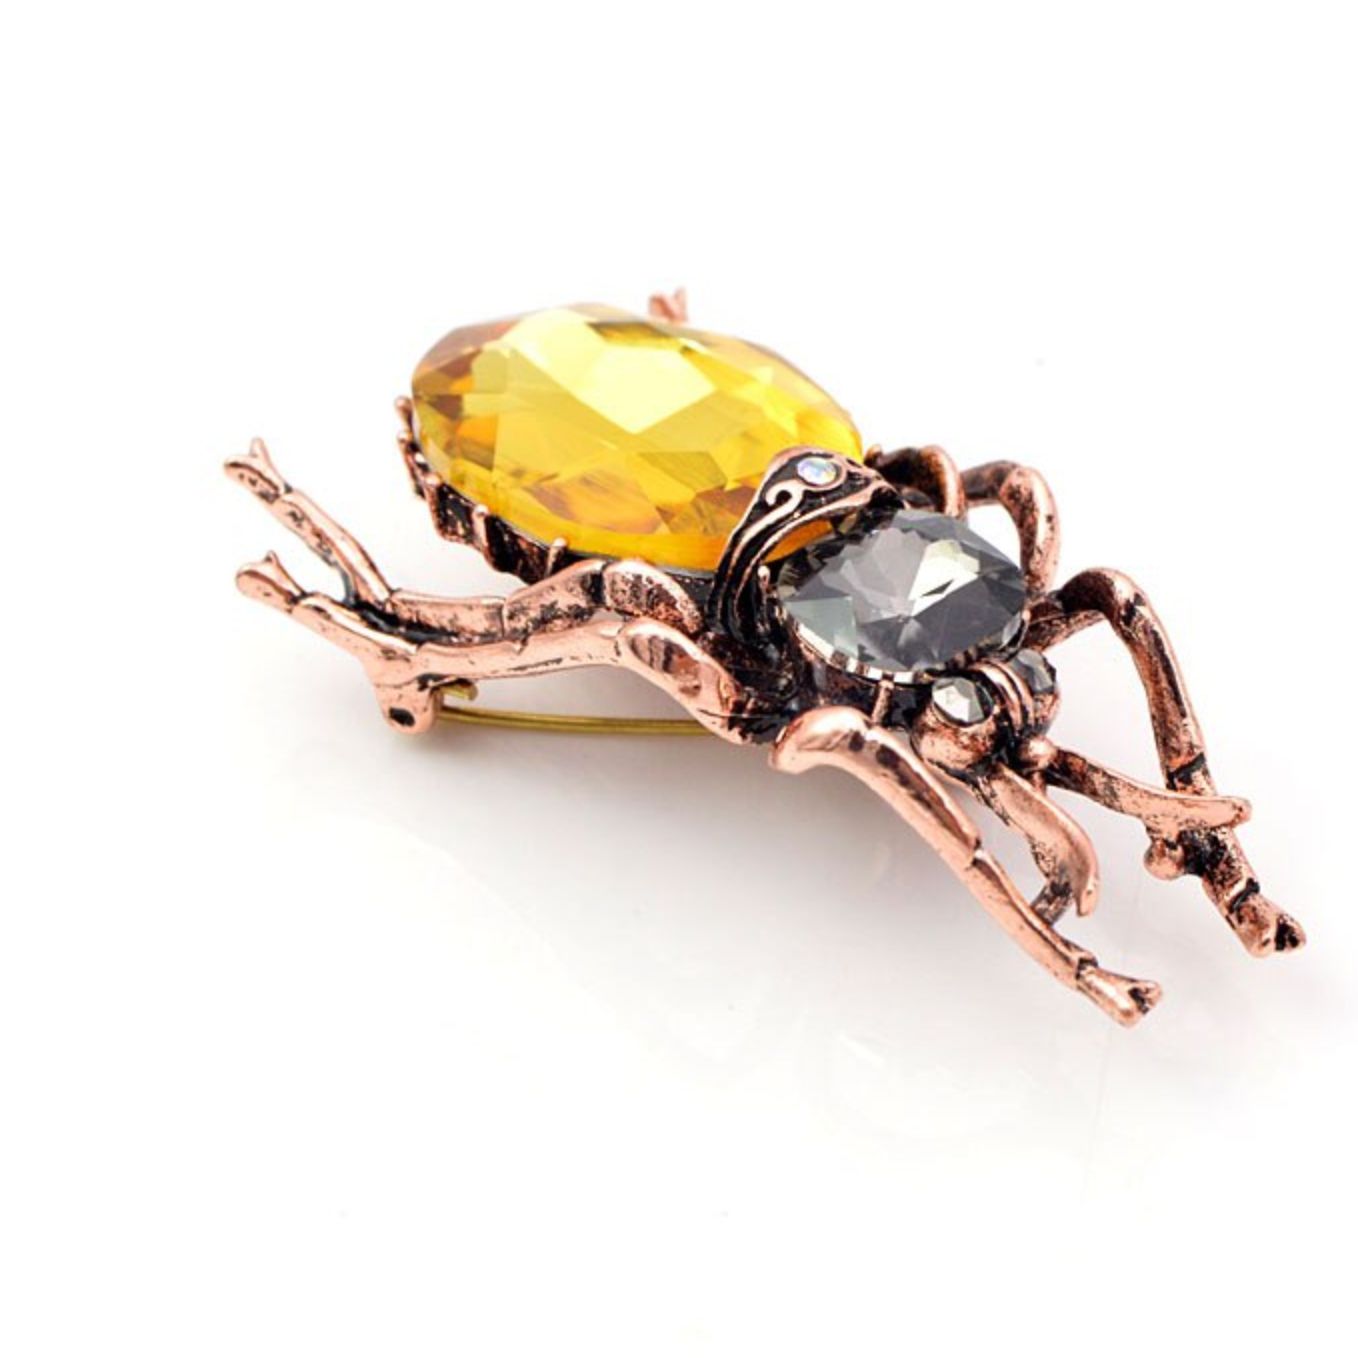 Crystal Beetle Brooch Vintage Style Insect Jewellery Pin